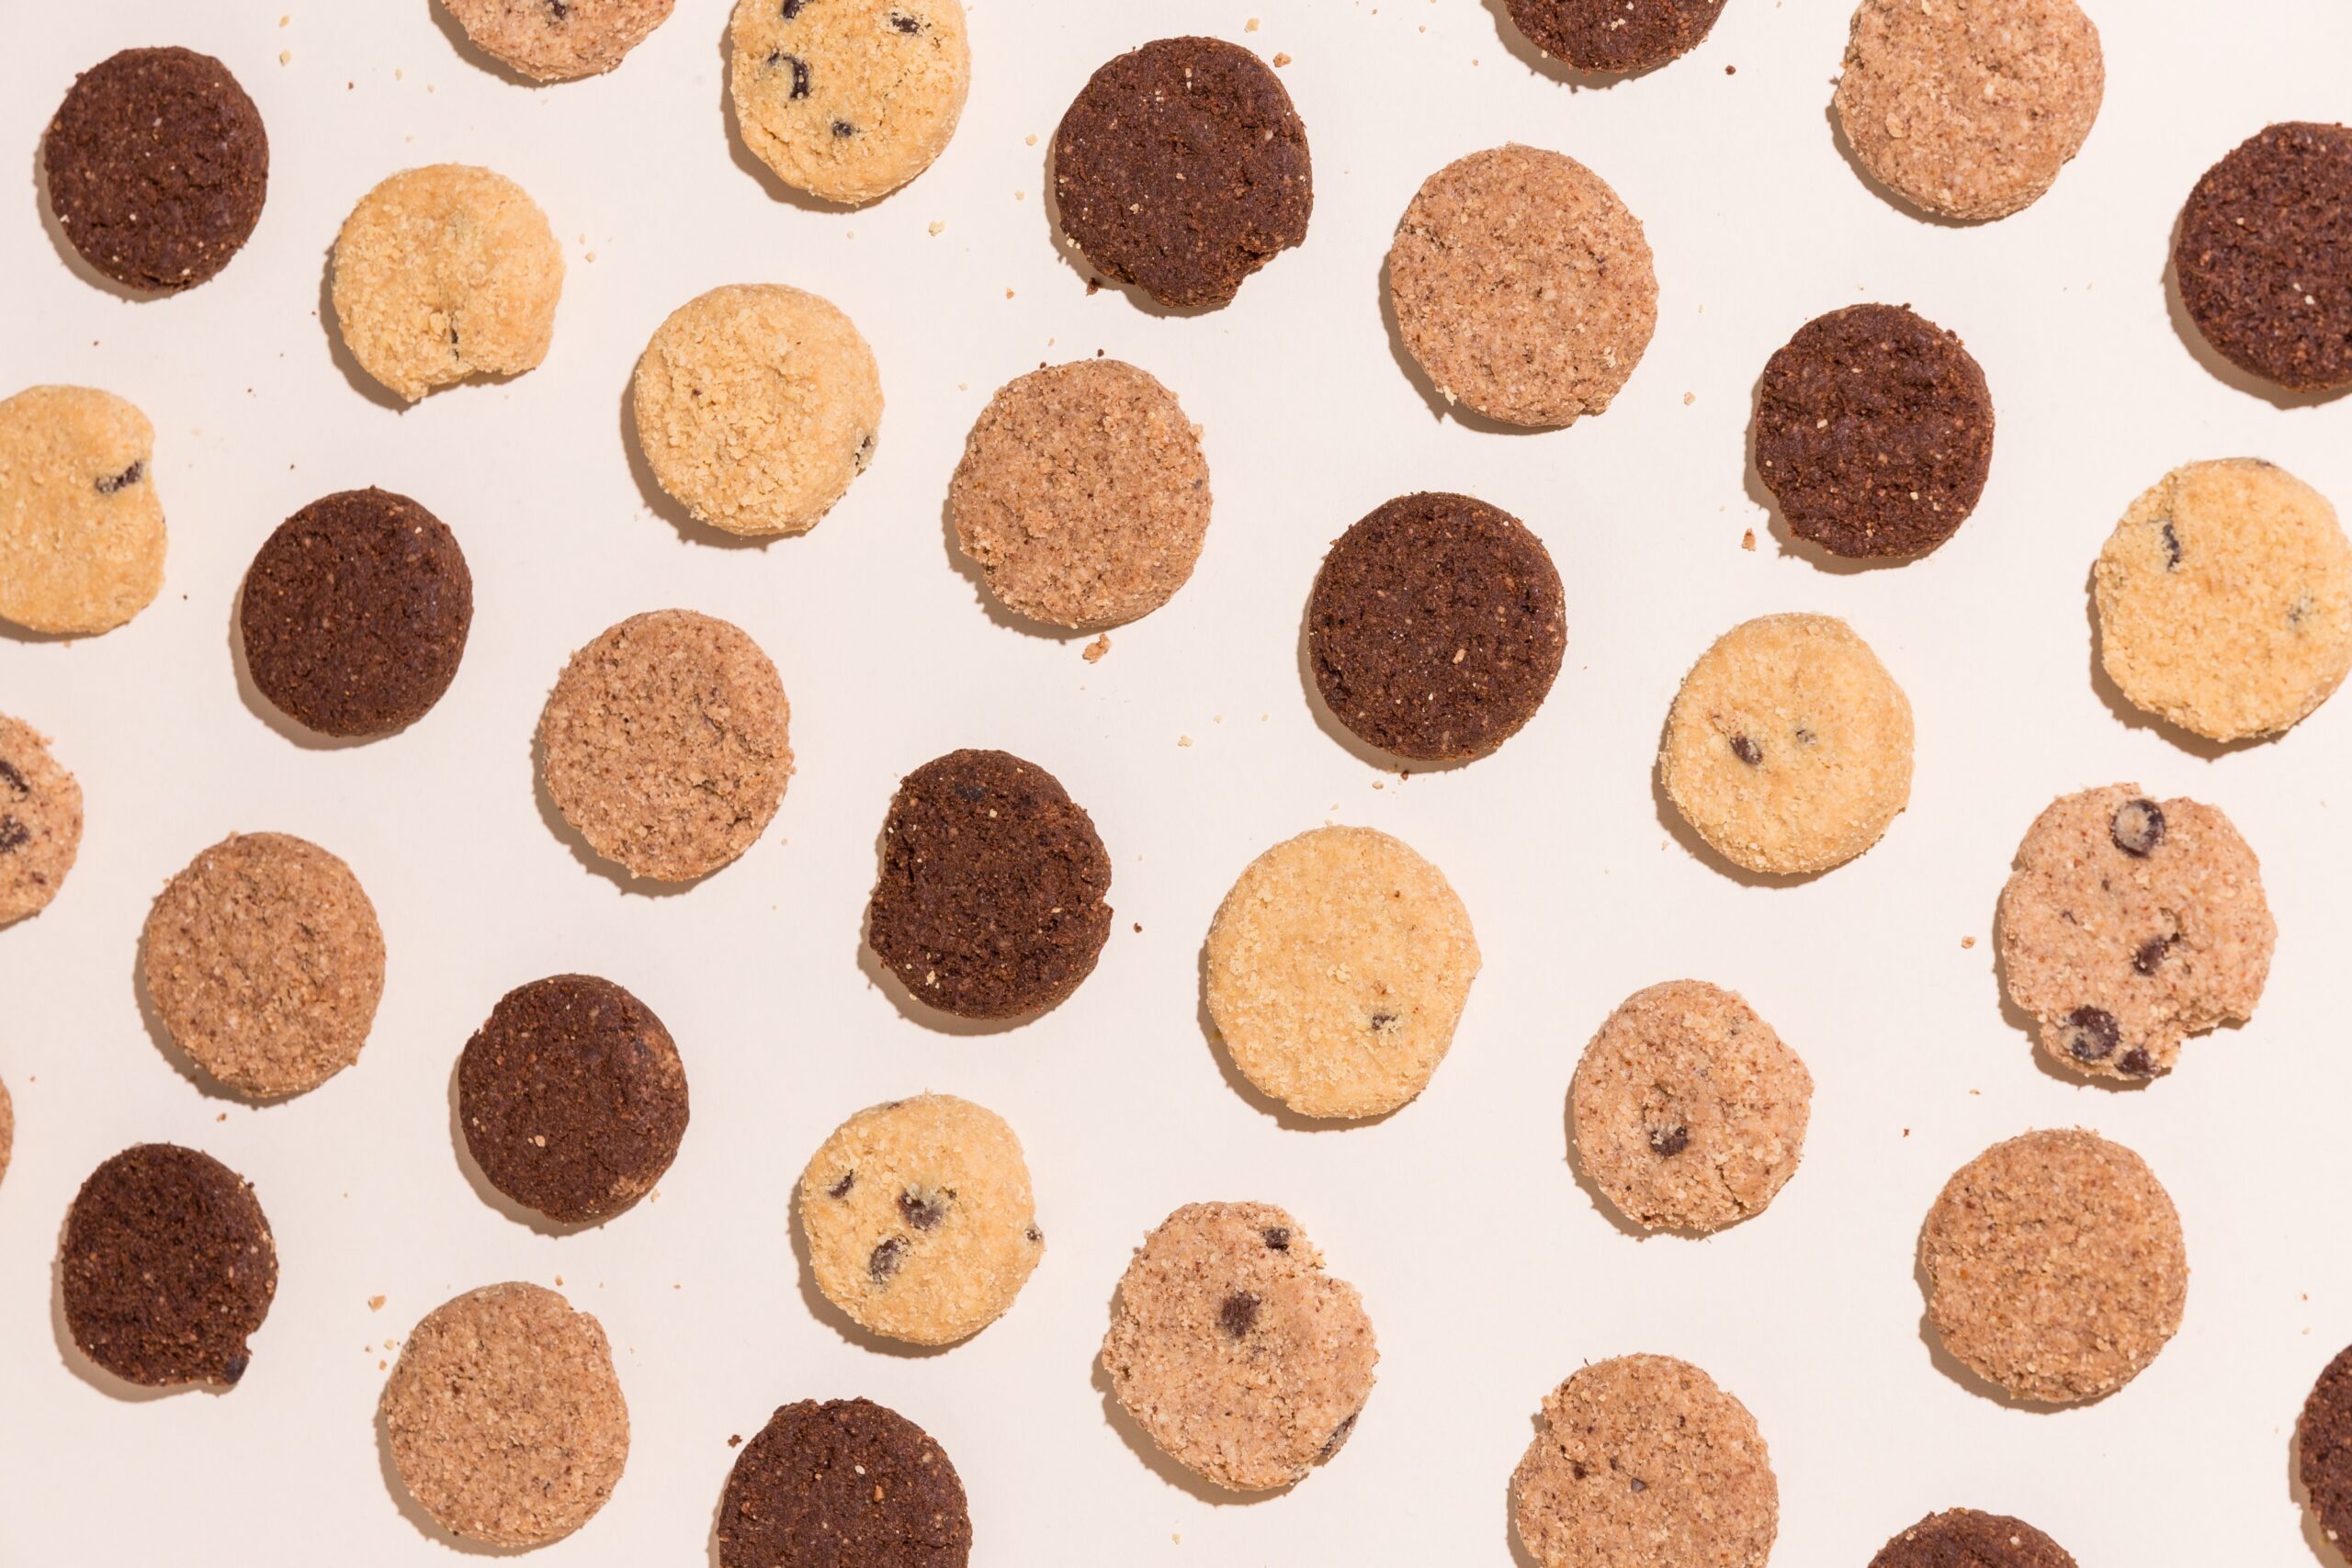 A grid of cookies alternate between light and dark colored treats.